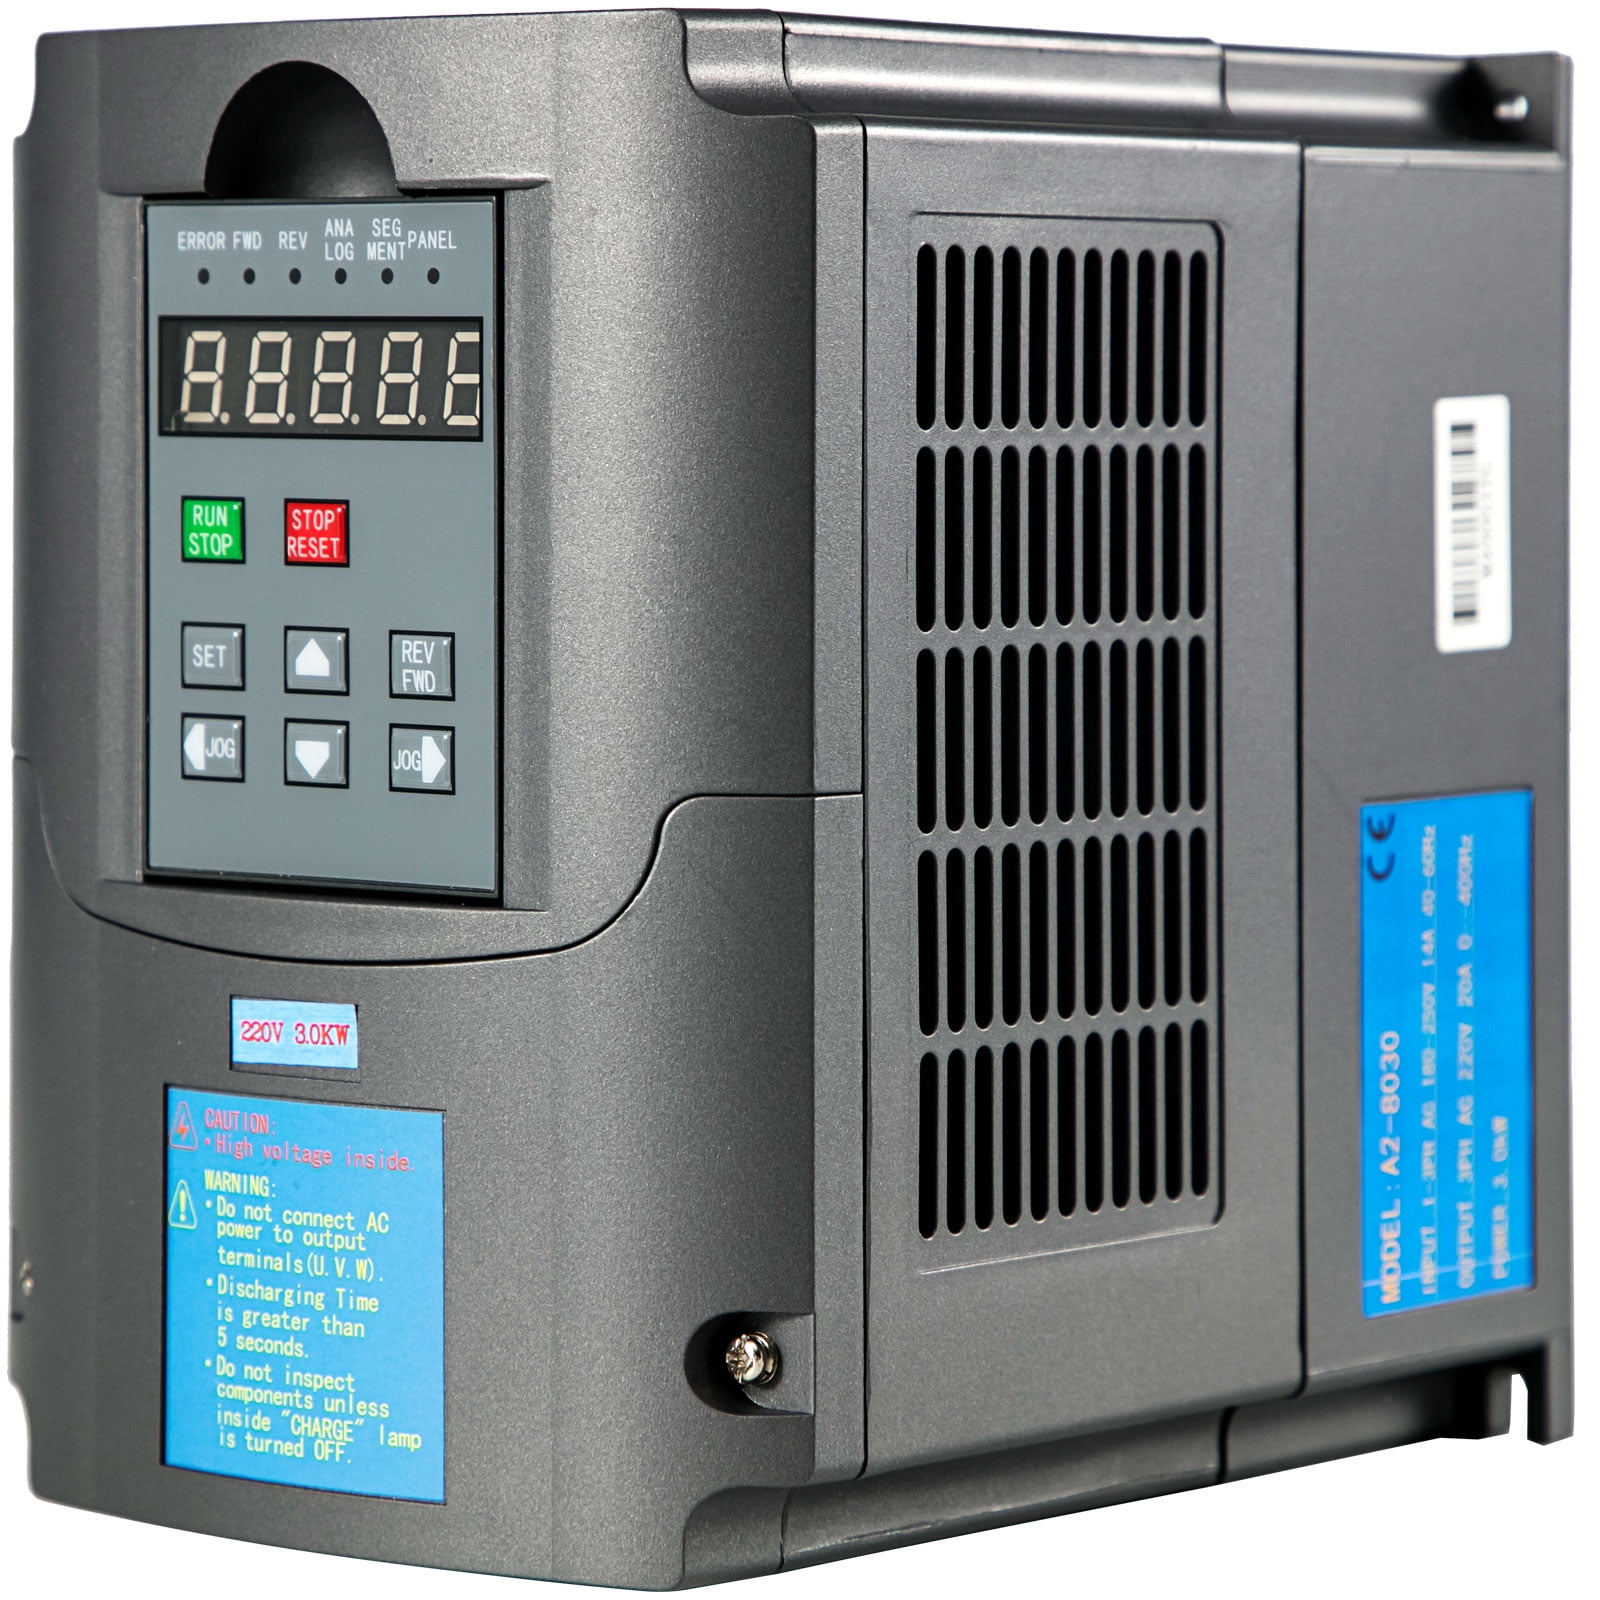 【EU Stock】 3KW 220V Inverter VFD 3 phase Variable Frequency Drive Speed Control 